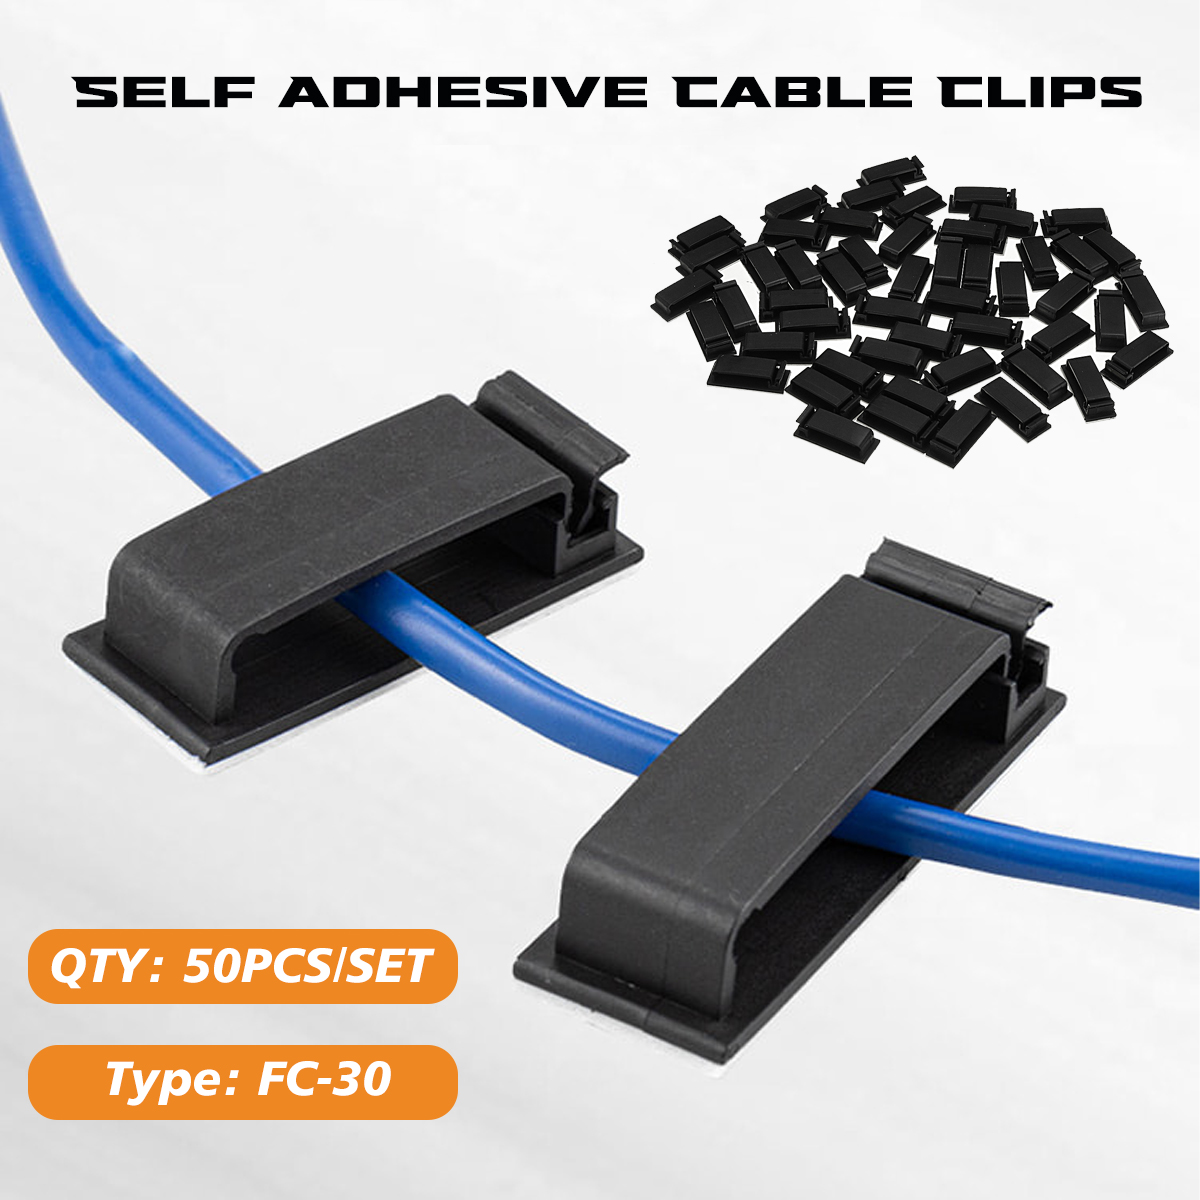 50Pcs-Cable-Clips-Self-Adhesive-Cord-Management-Wire-Holder-Organizer-Clamp-for-Computer-1935352-6